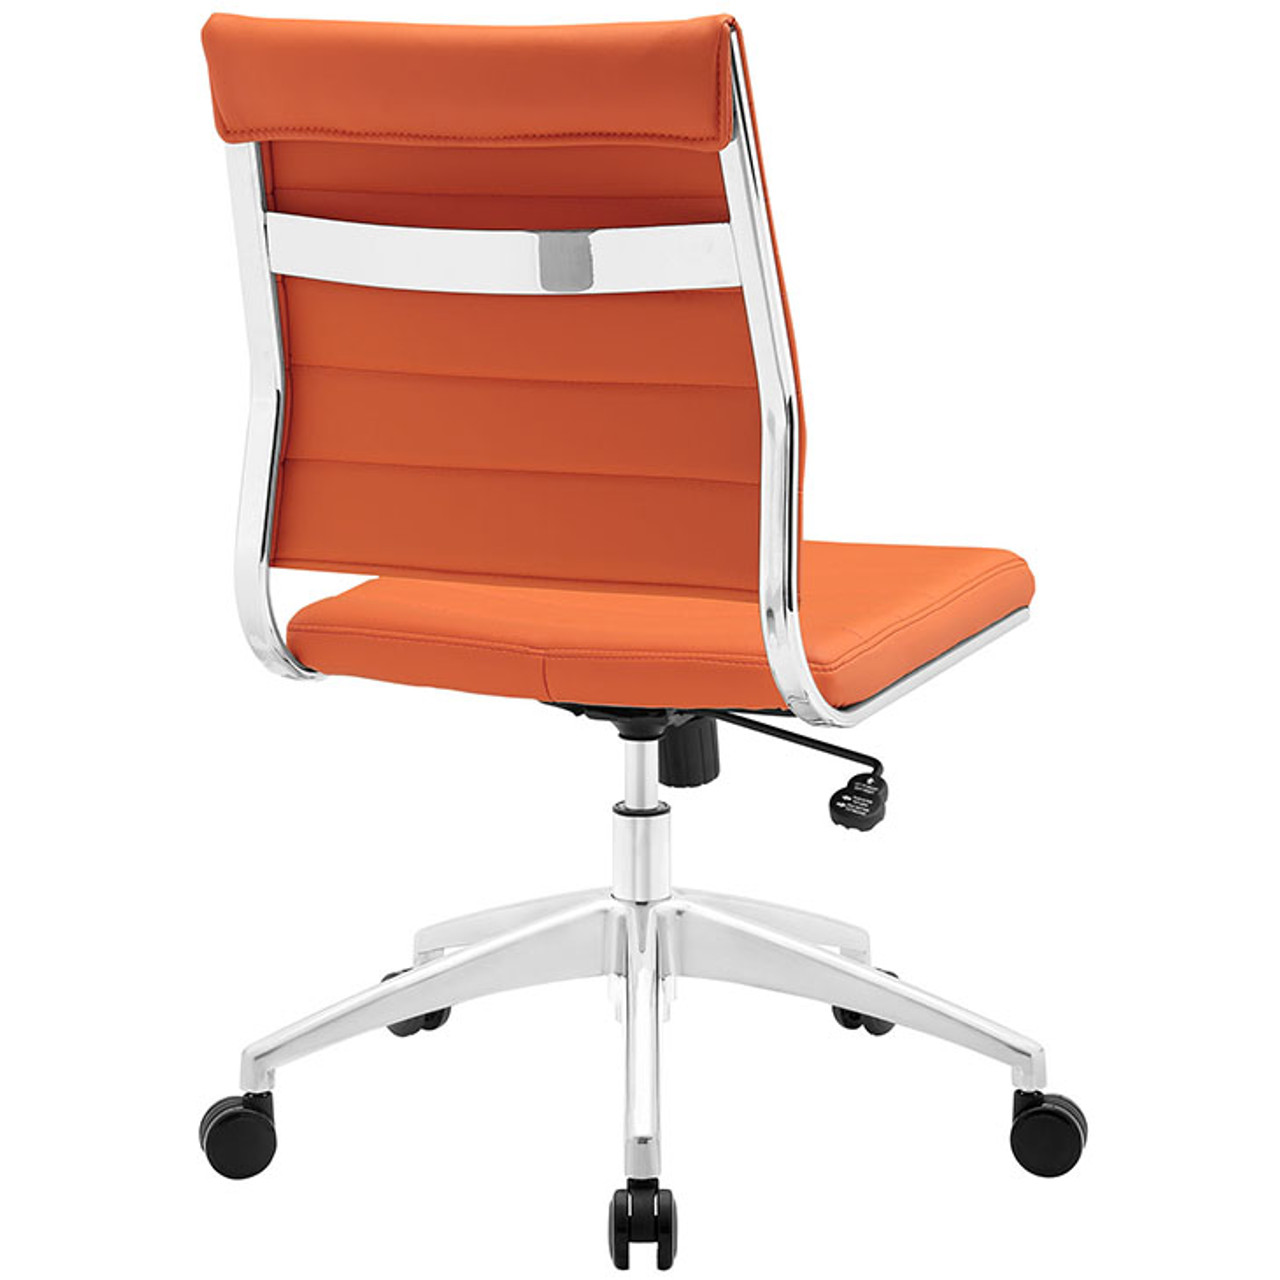  YOUTASTE Office Chair Modern Armless Desk Chair, Height  Adjustable Swivel Rocking Computer Task Chair, Faux Leather Sewing Chair  with Wheels, Stylish Lounge Vanity Chair, Orange : Home & Kitchen